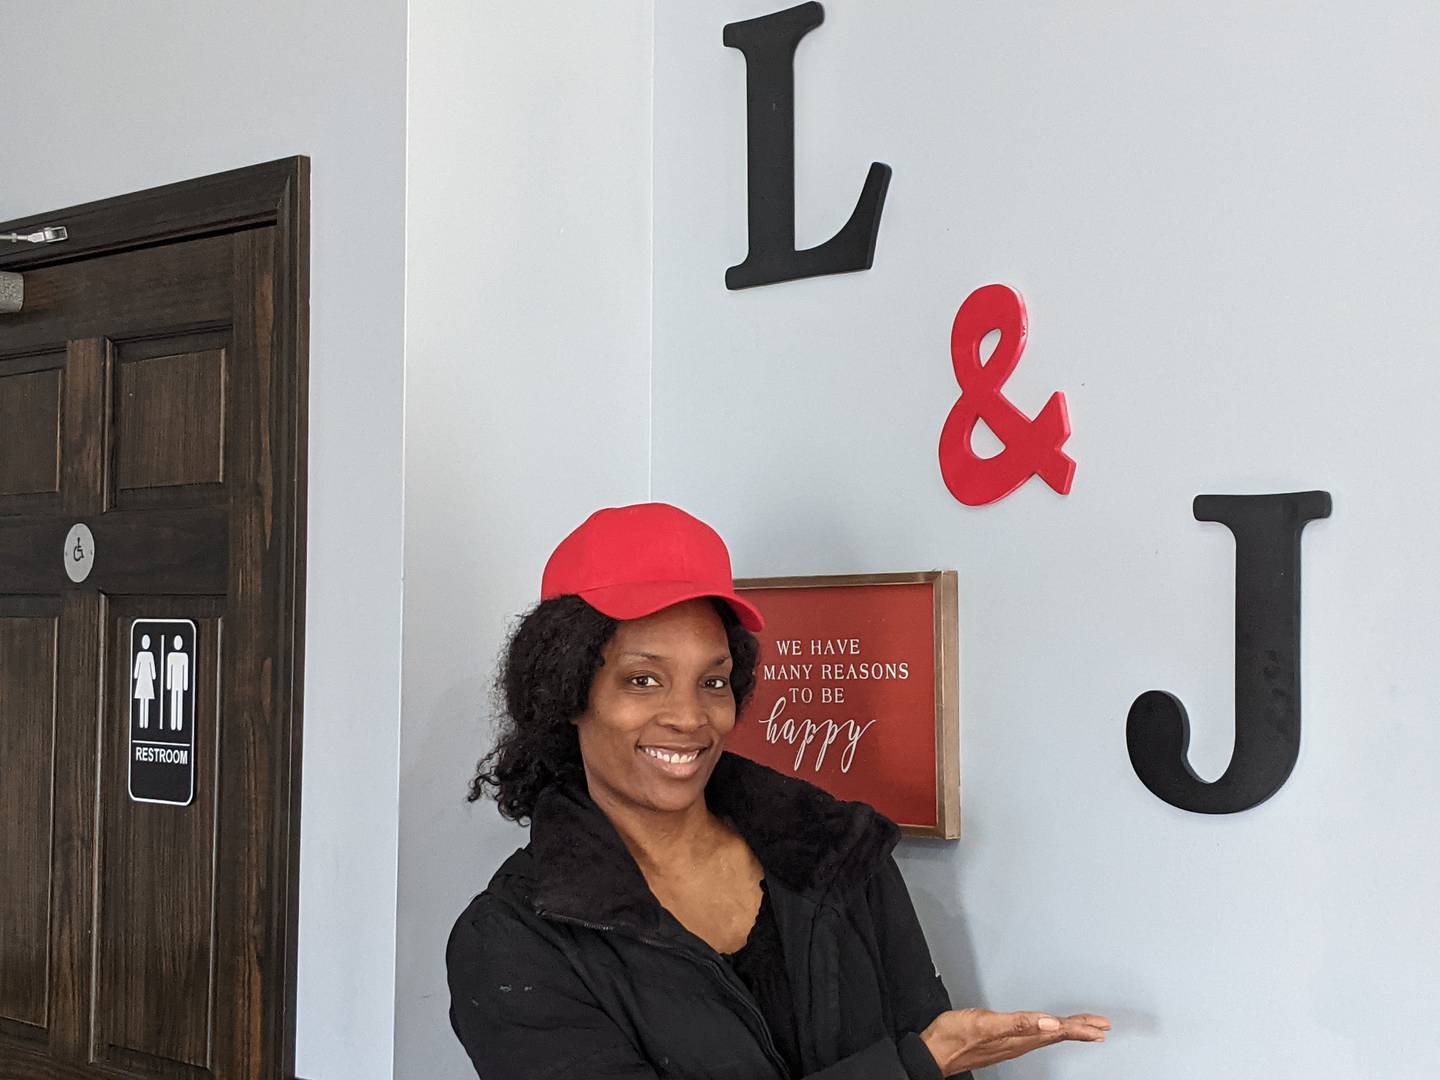 Carla Christian is co-owner of L & J Mississippi BBQ, which opened in December at 303 W. South St. in Plano.